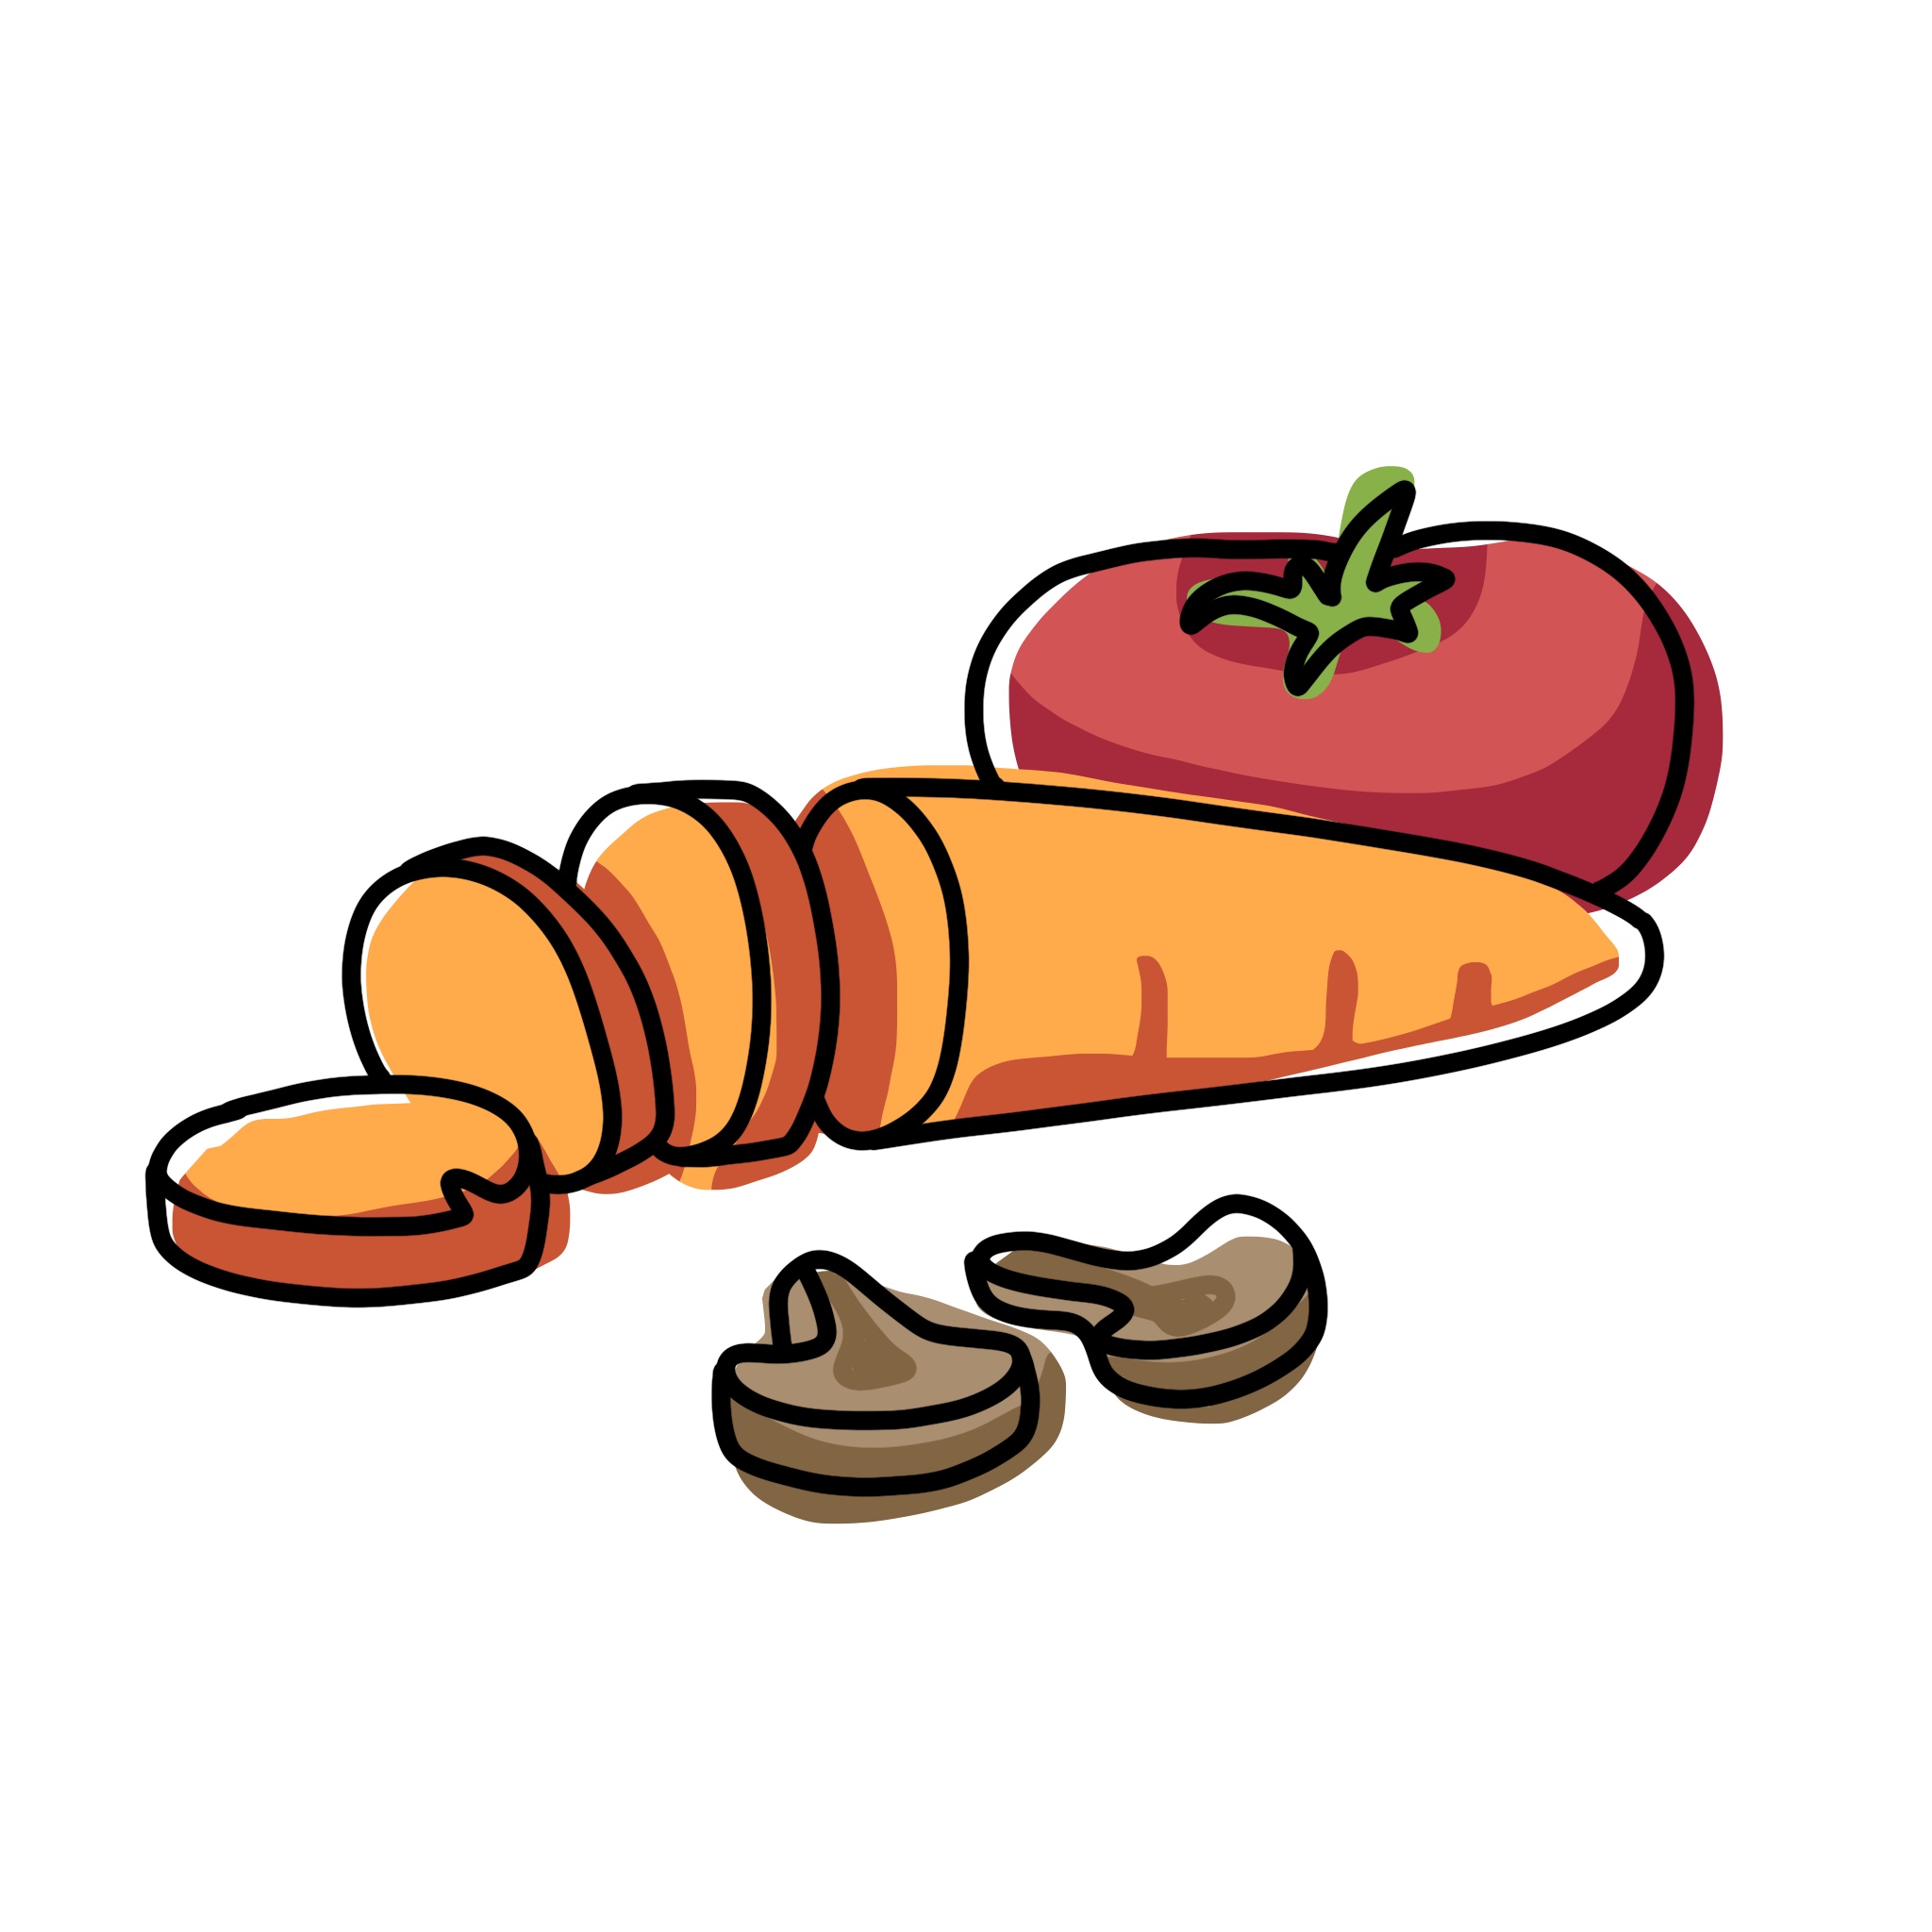 Illustration of a tomato, carrot, and mushrooms